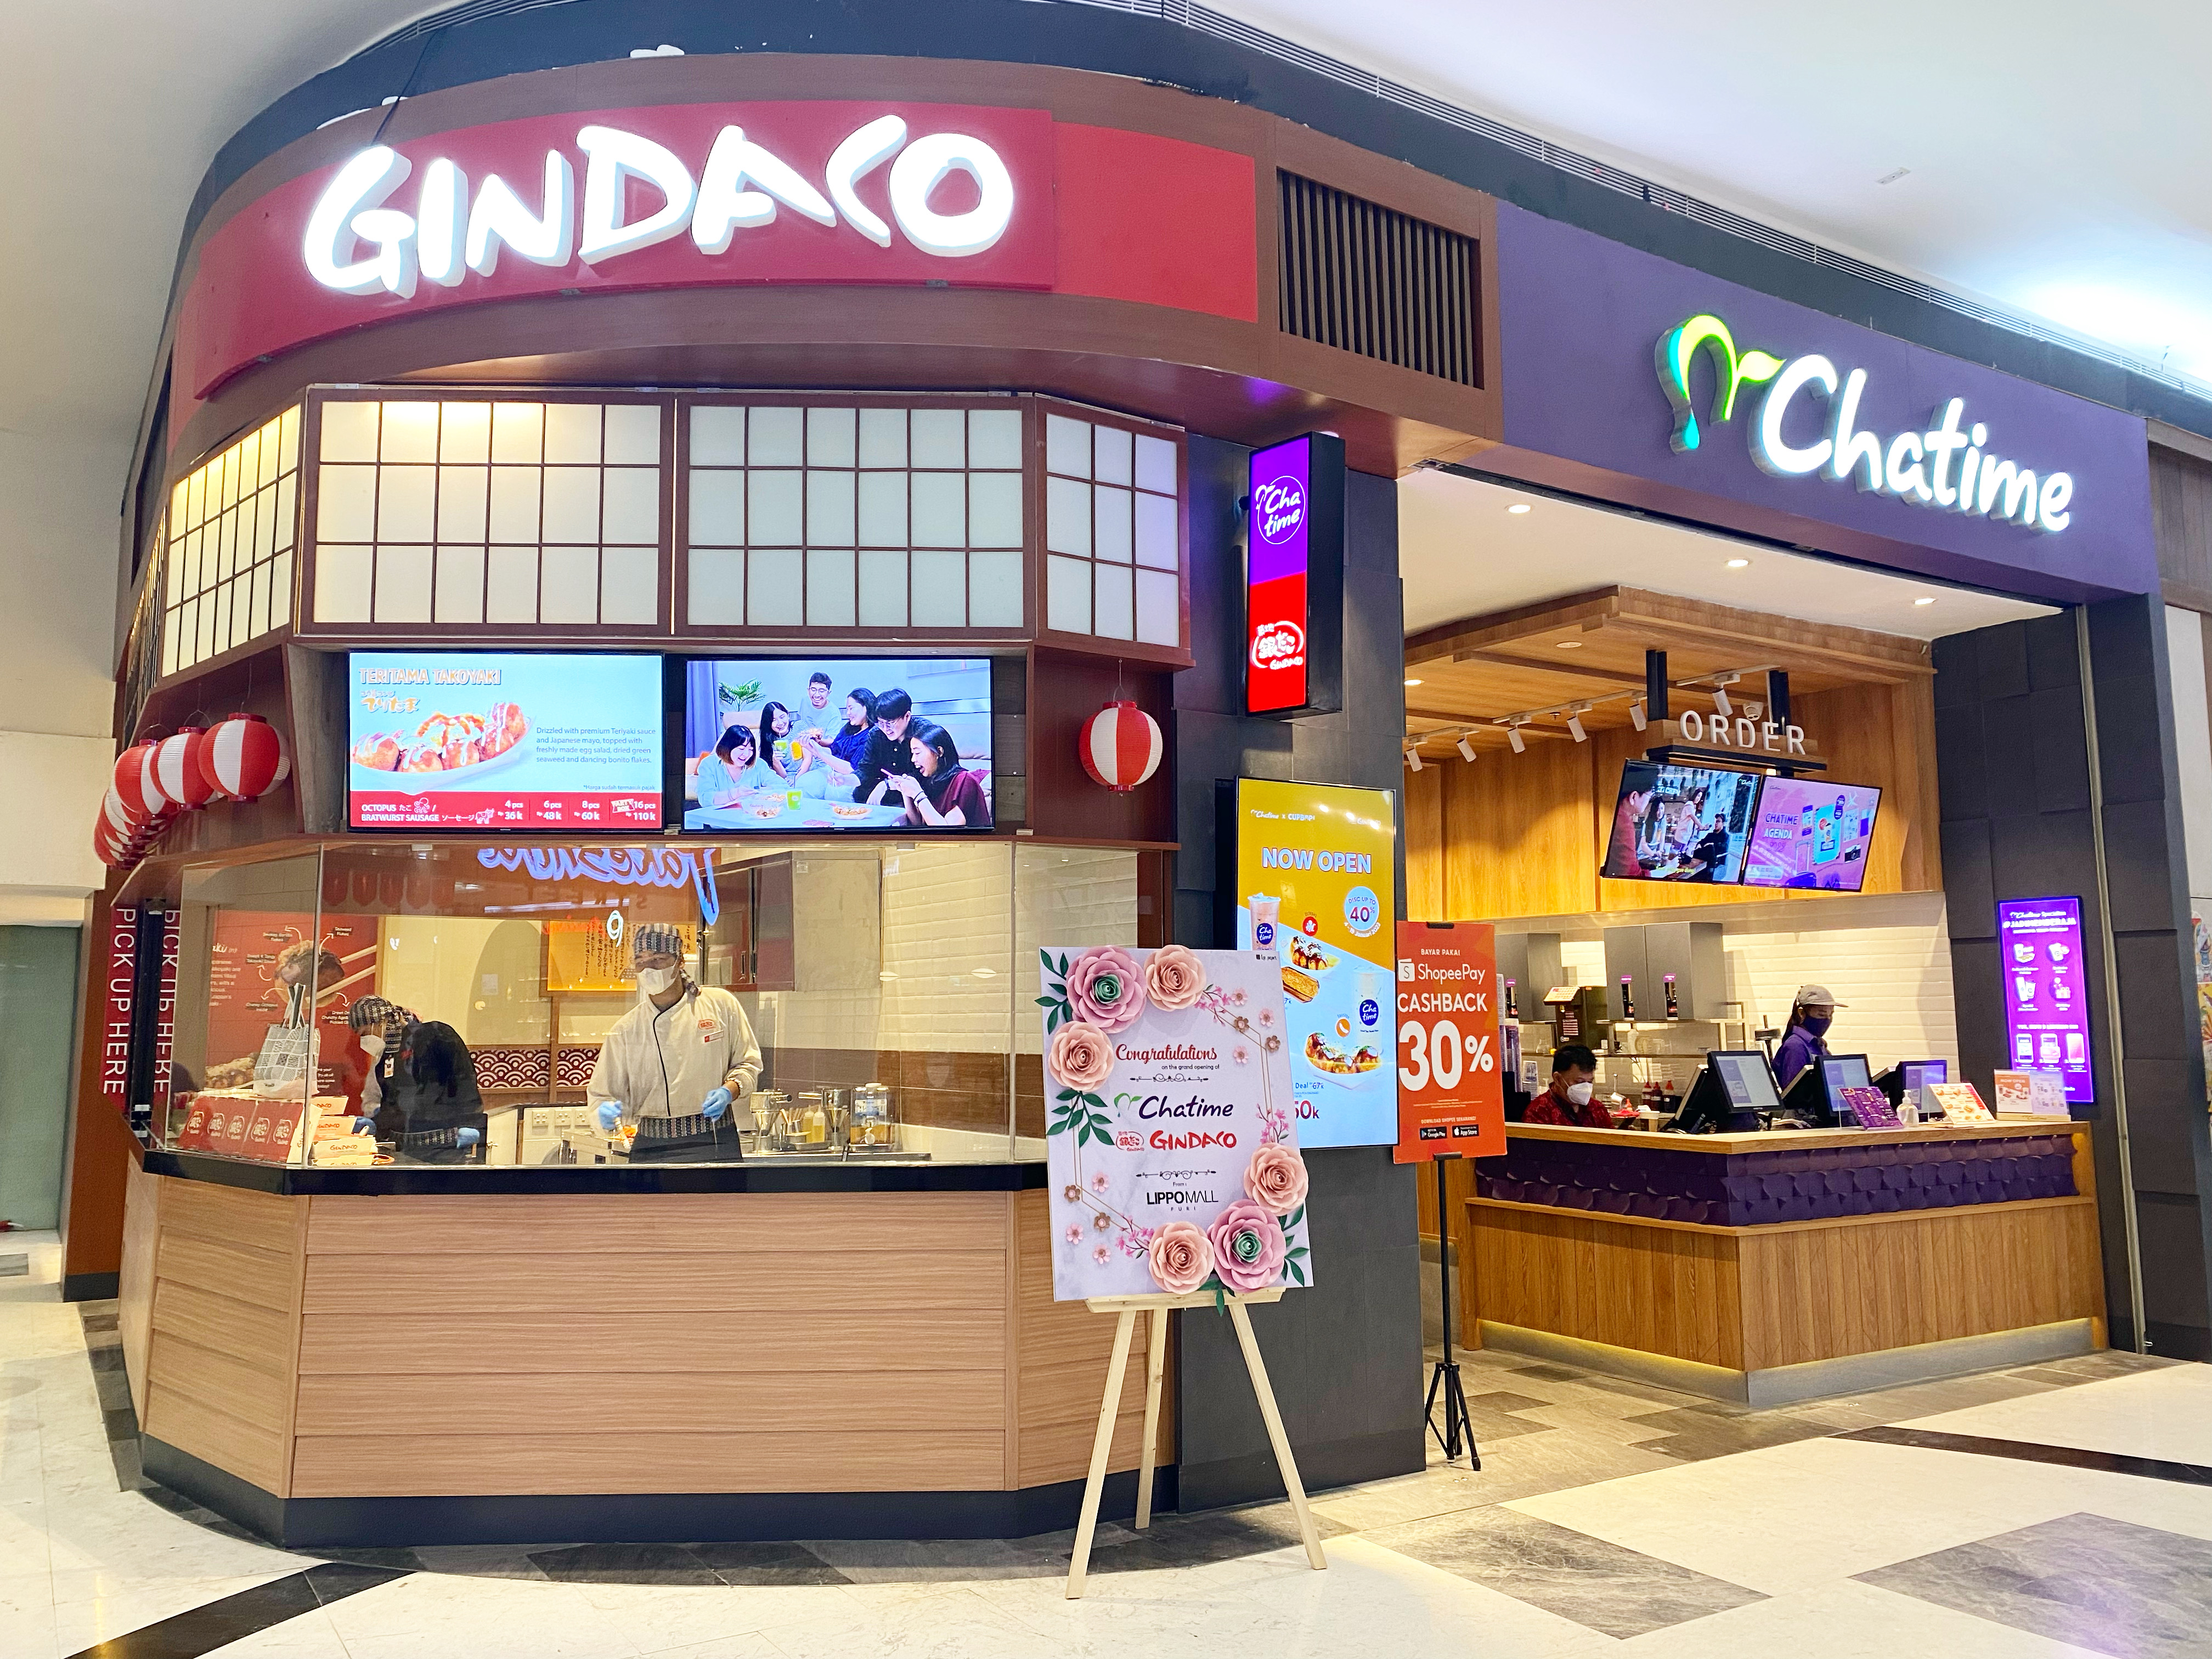 Chatime & Gindaco shop front in lippo mall puri st. moritz